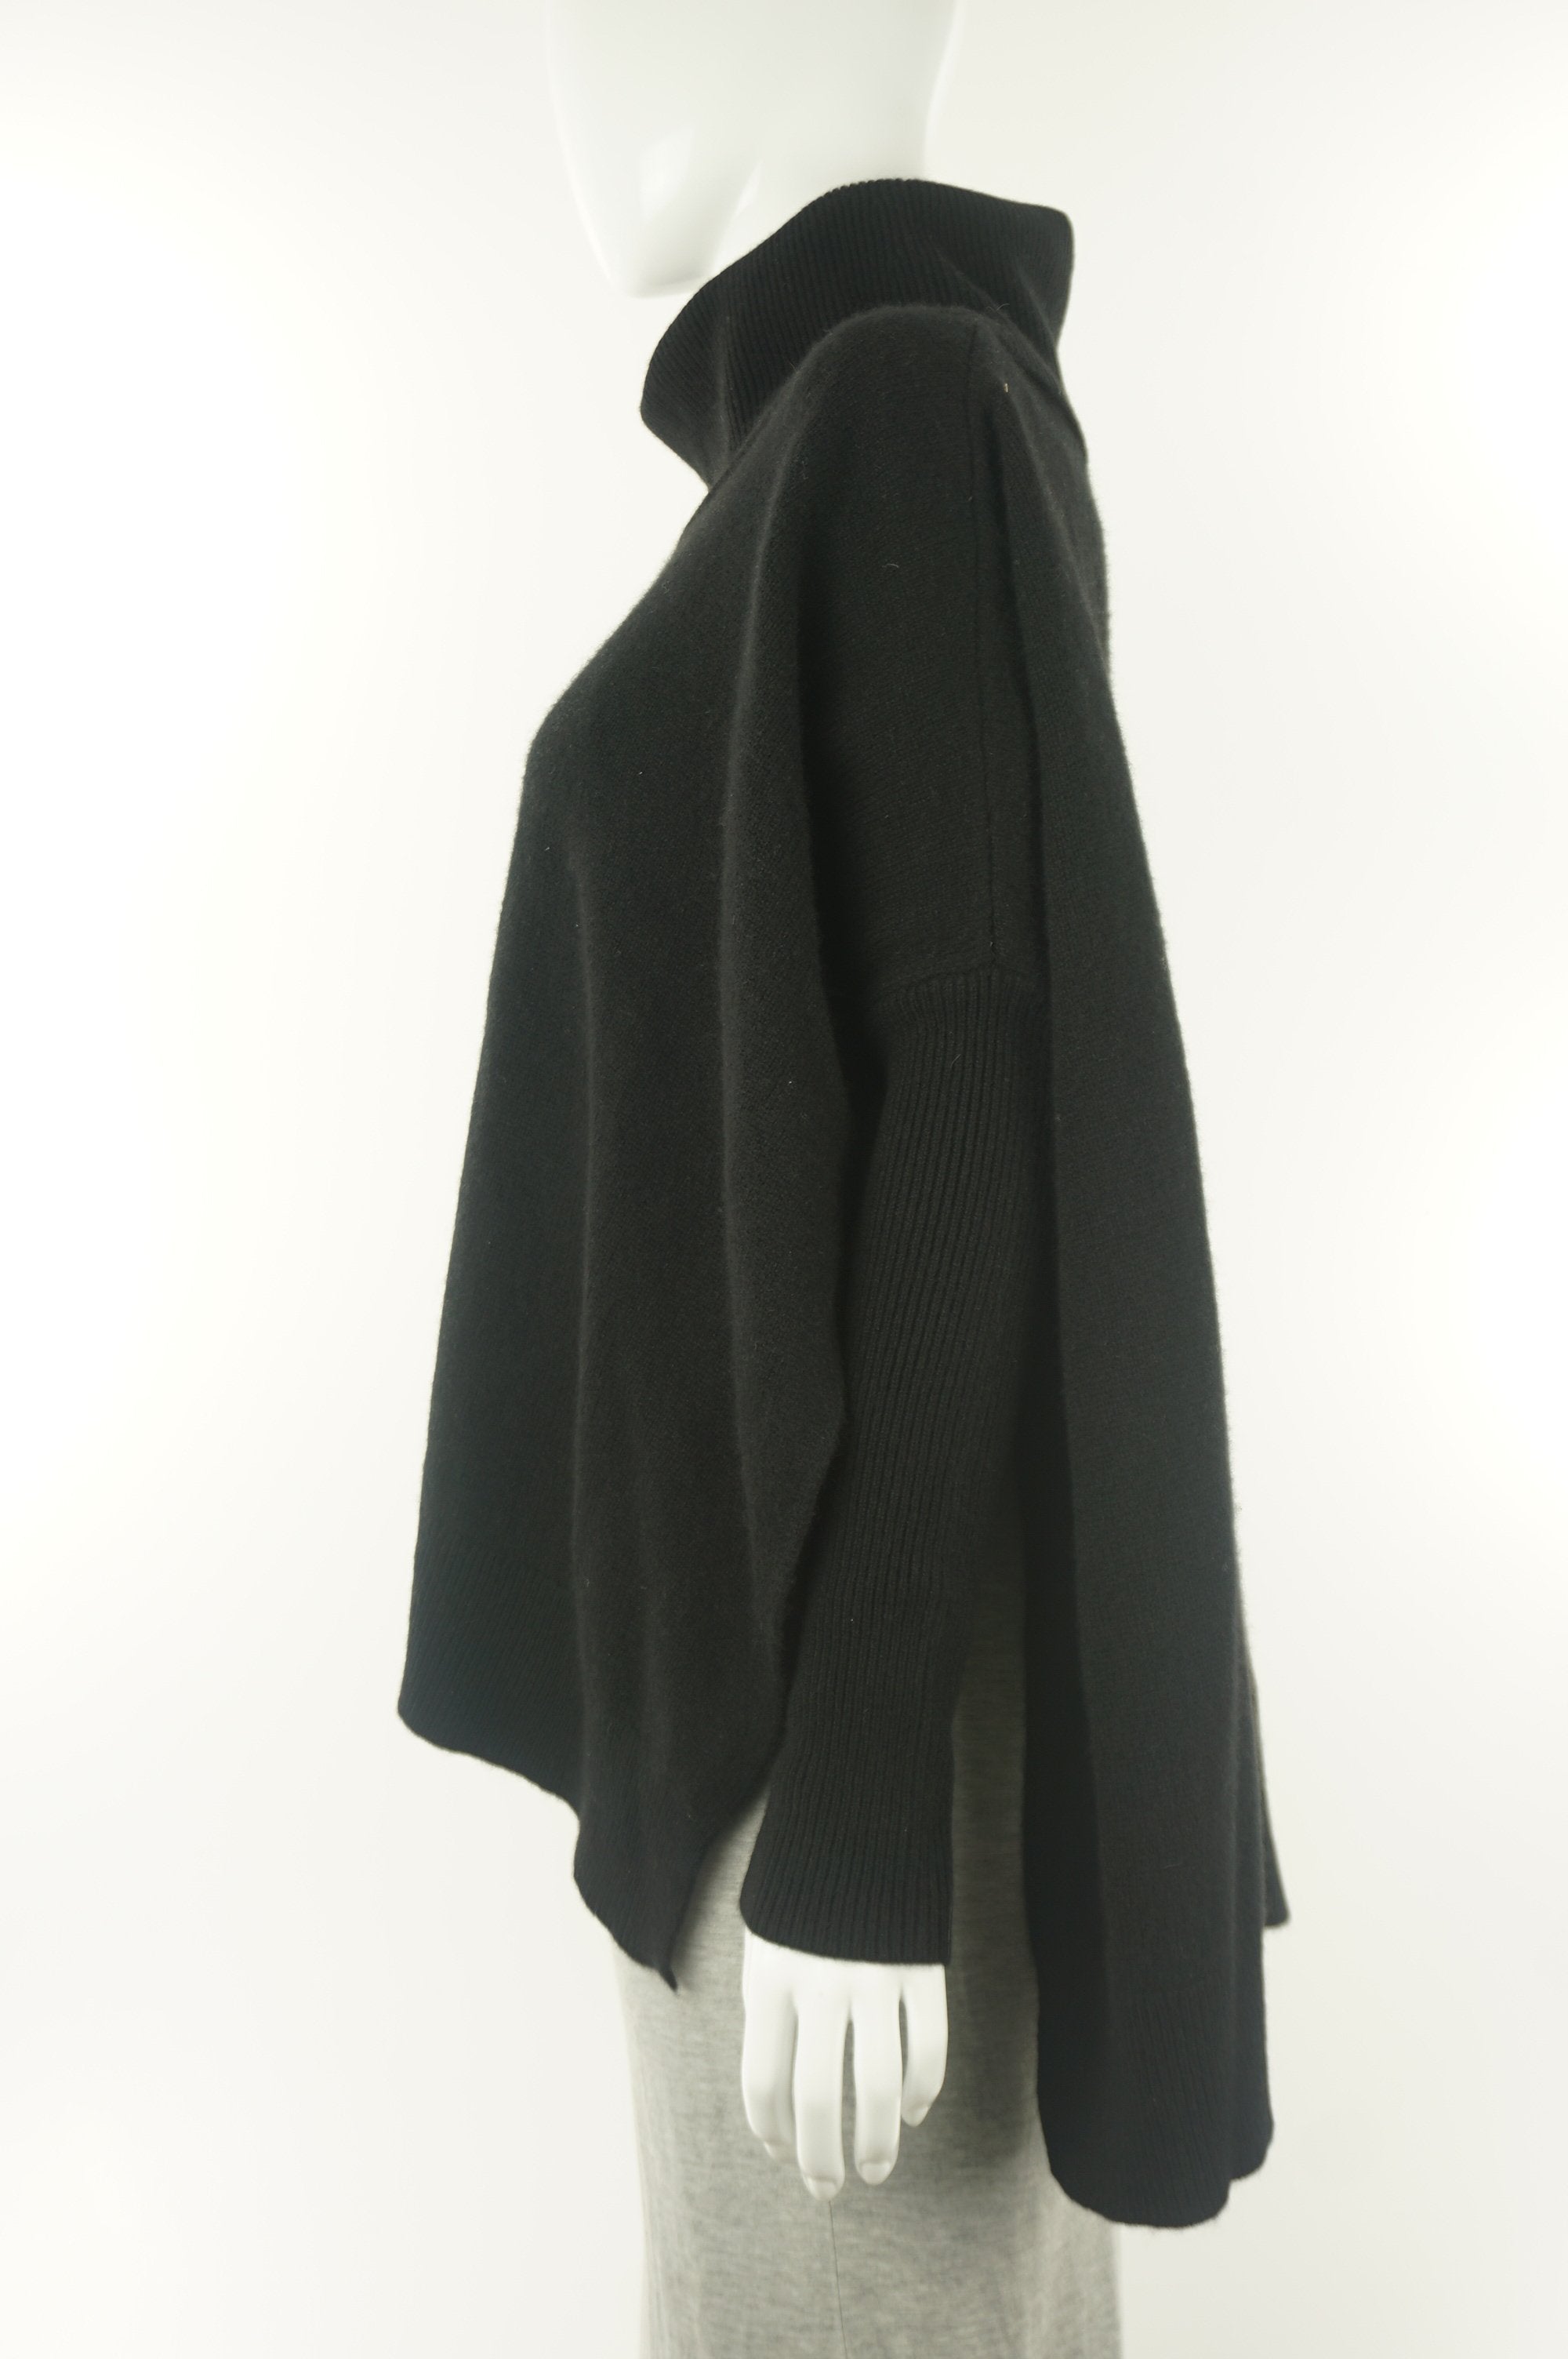 Lord & Taylor Cashmere Cape Poncho, Super soft pullover for a warm and elegant look., Black, 100% Cashmere, 